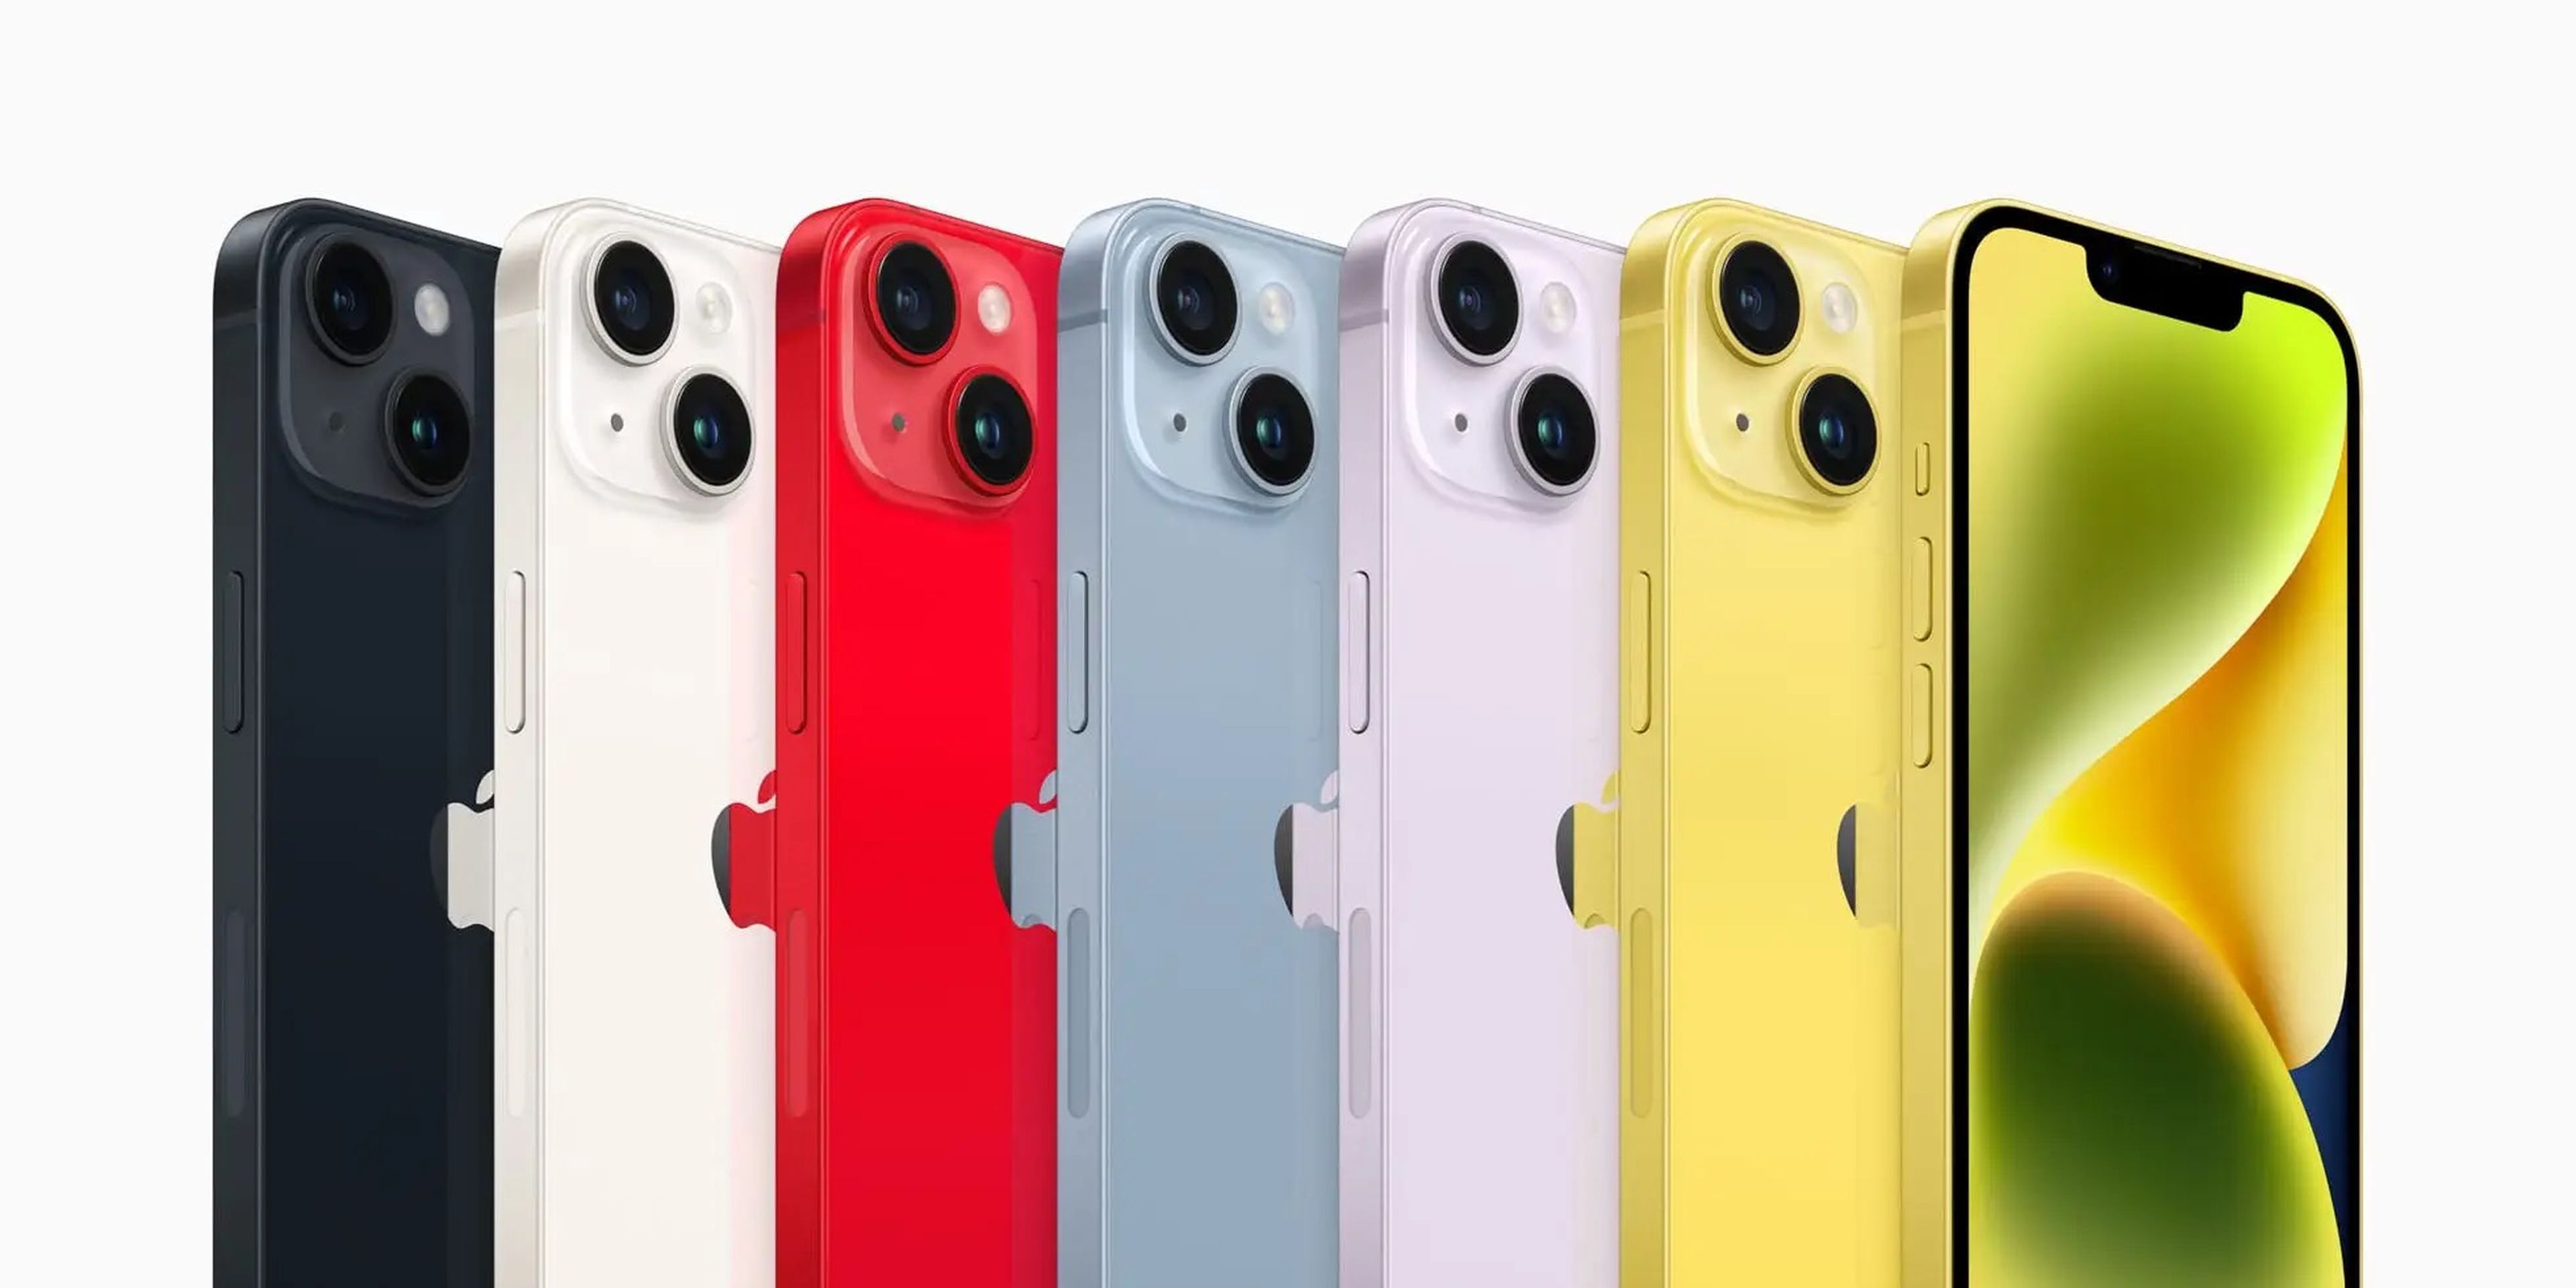 Apple's iPhone 14 and iPhone 14 plus color range, including a new yellow shade.